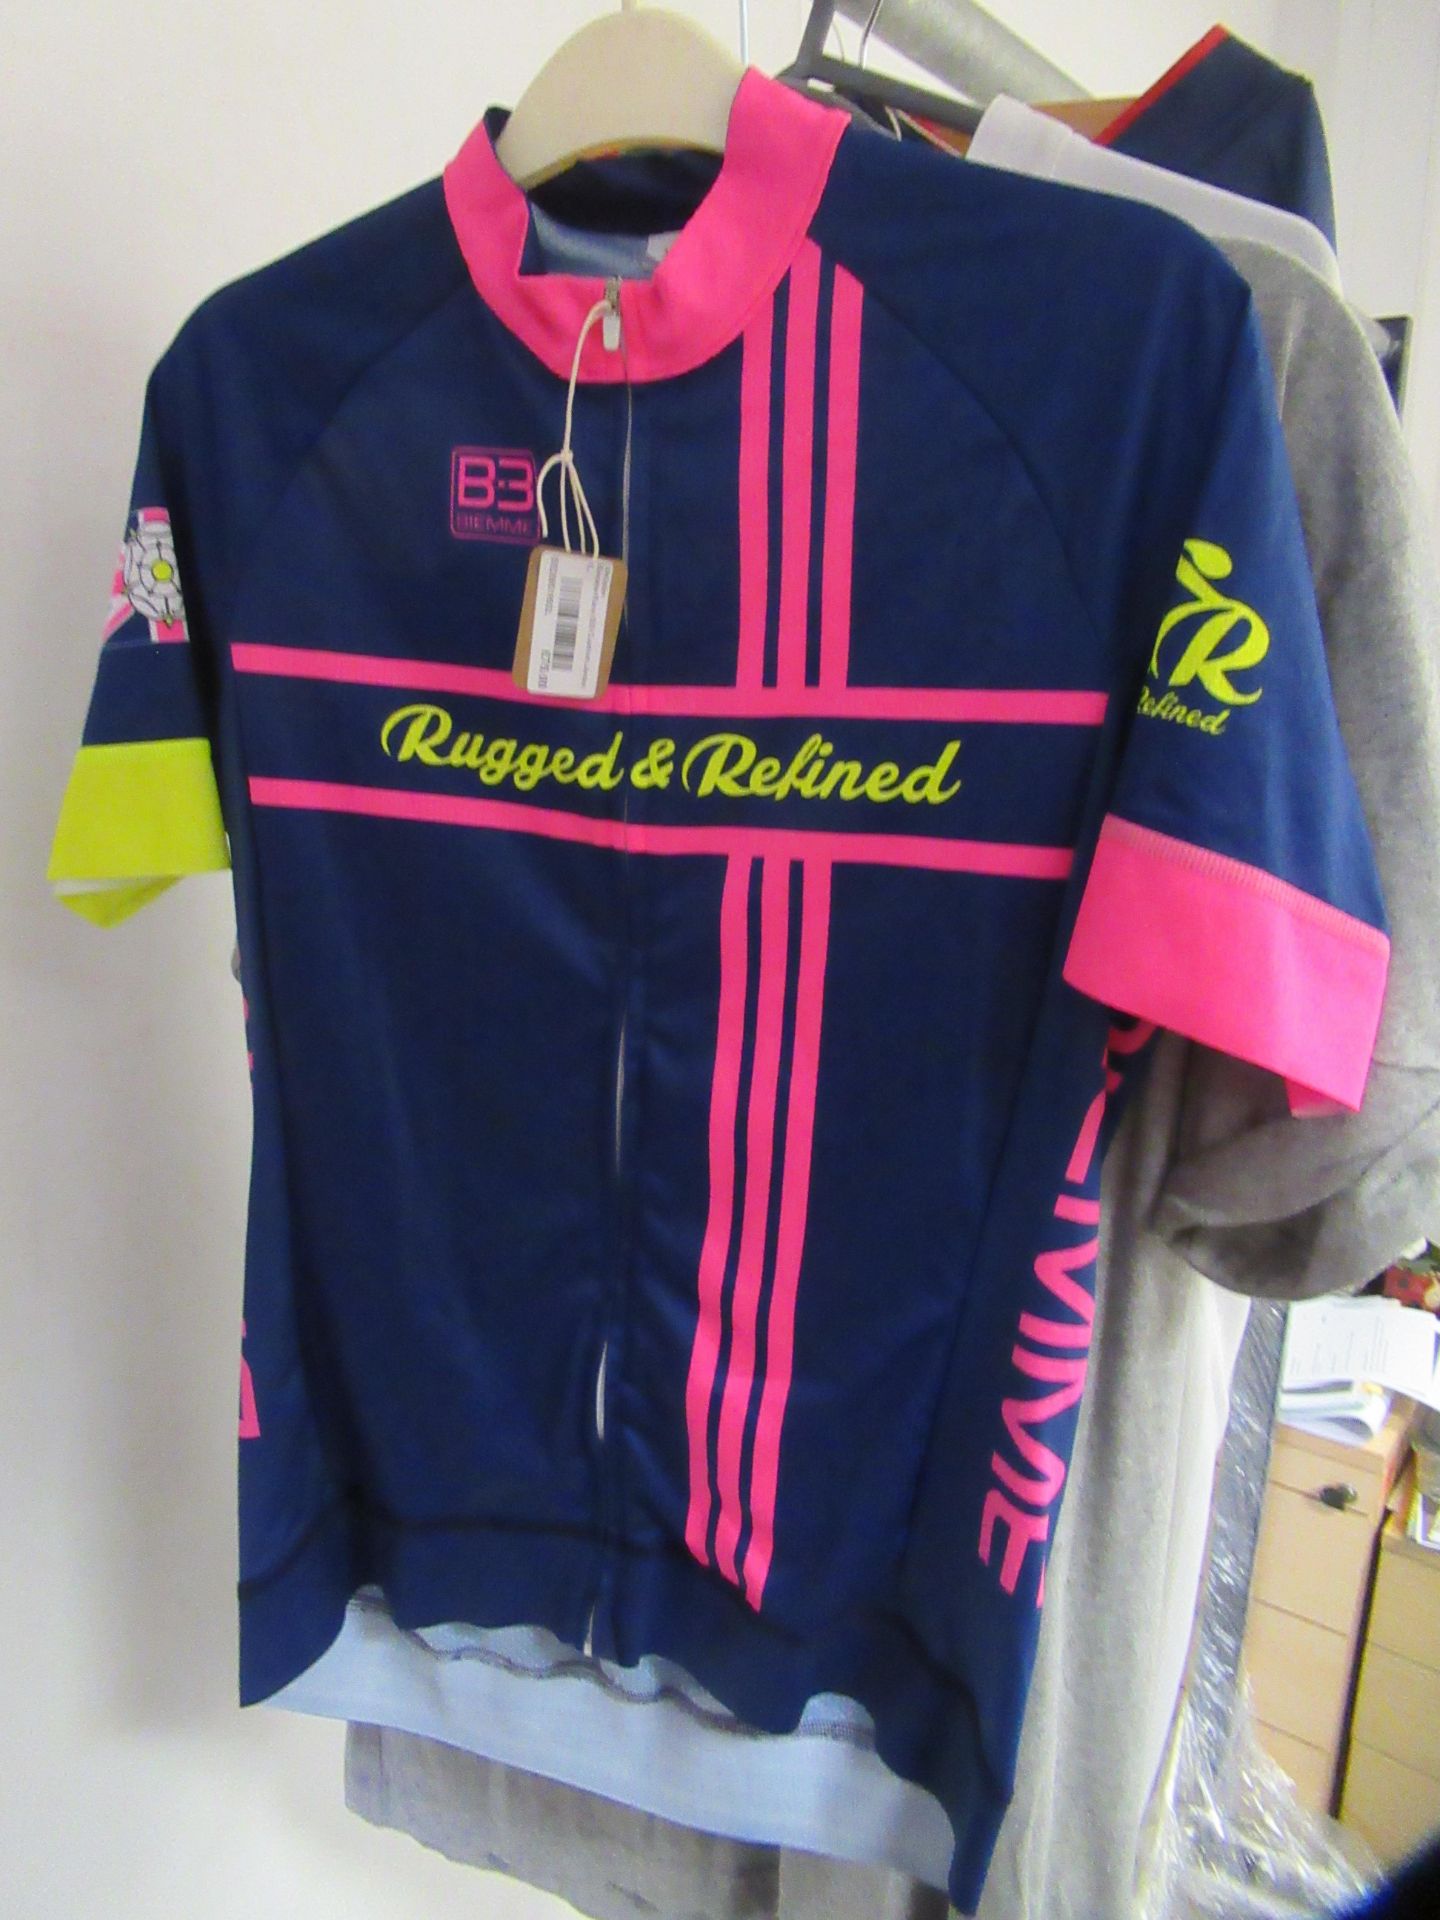 XL Male Cycling Clothes - Image 4 of 7